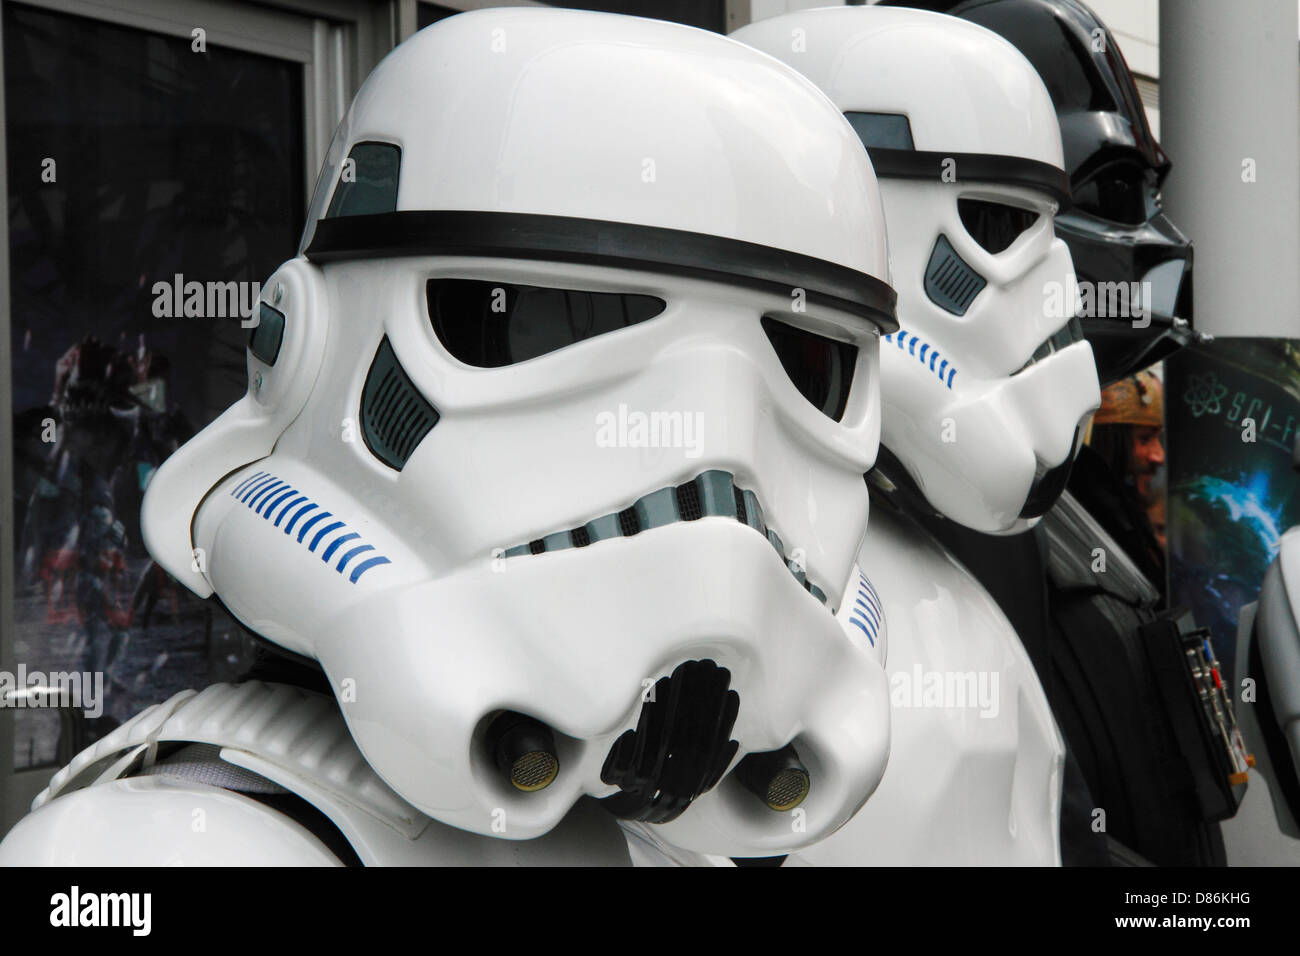 Star Wars Imperial Stormtroopers at Science fiction festival, London, UK Stock Photo